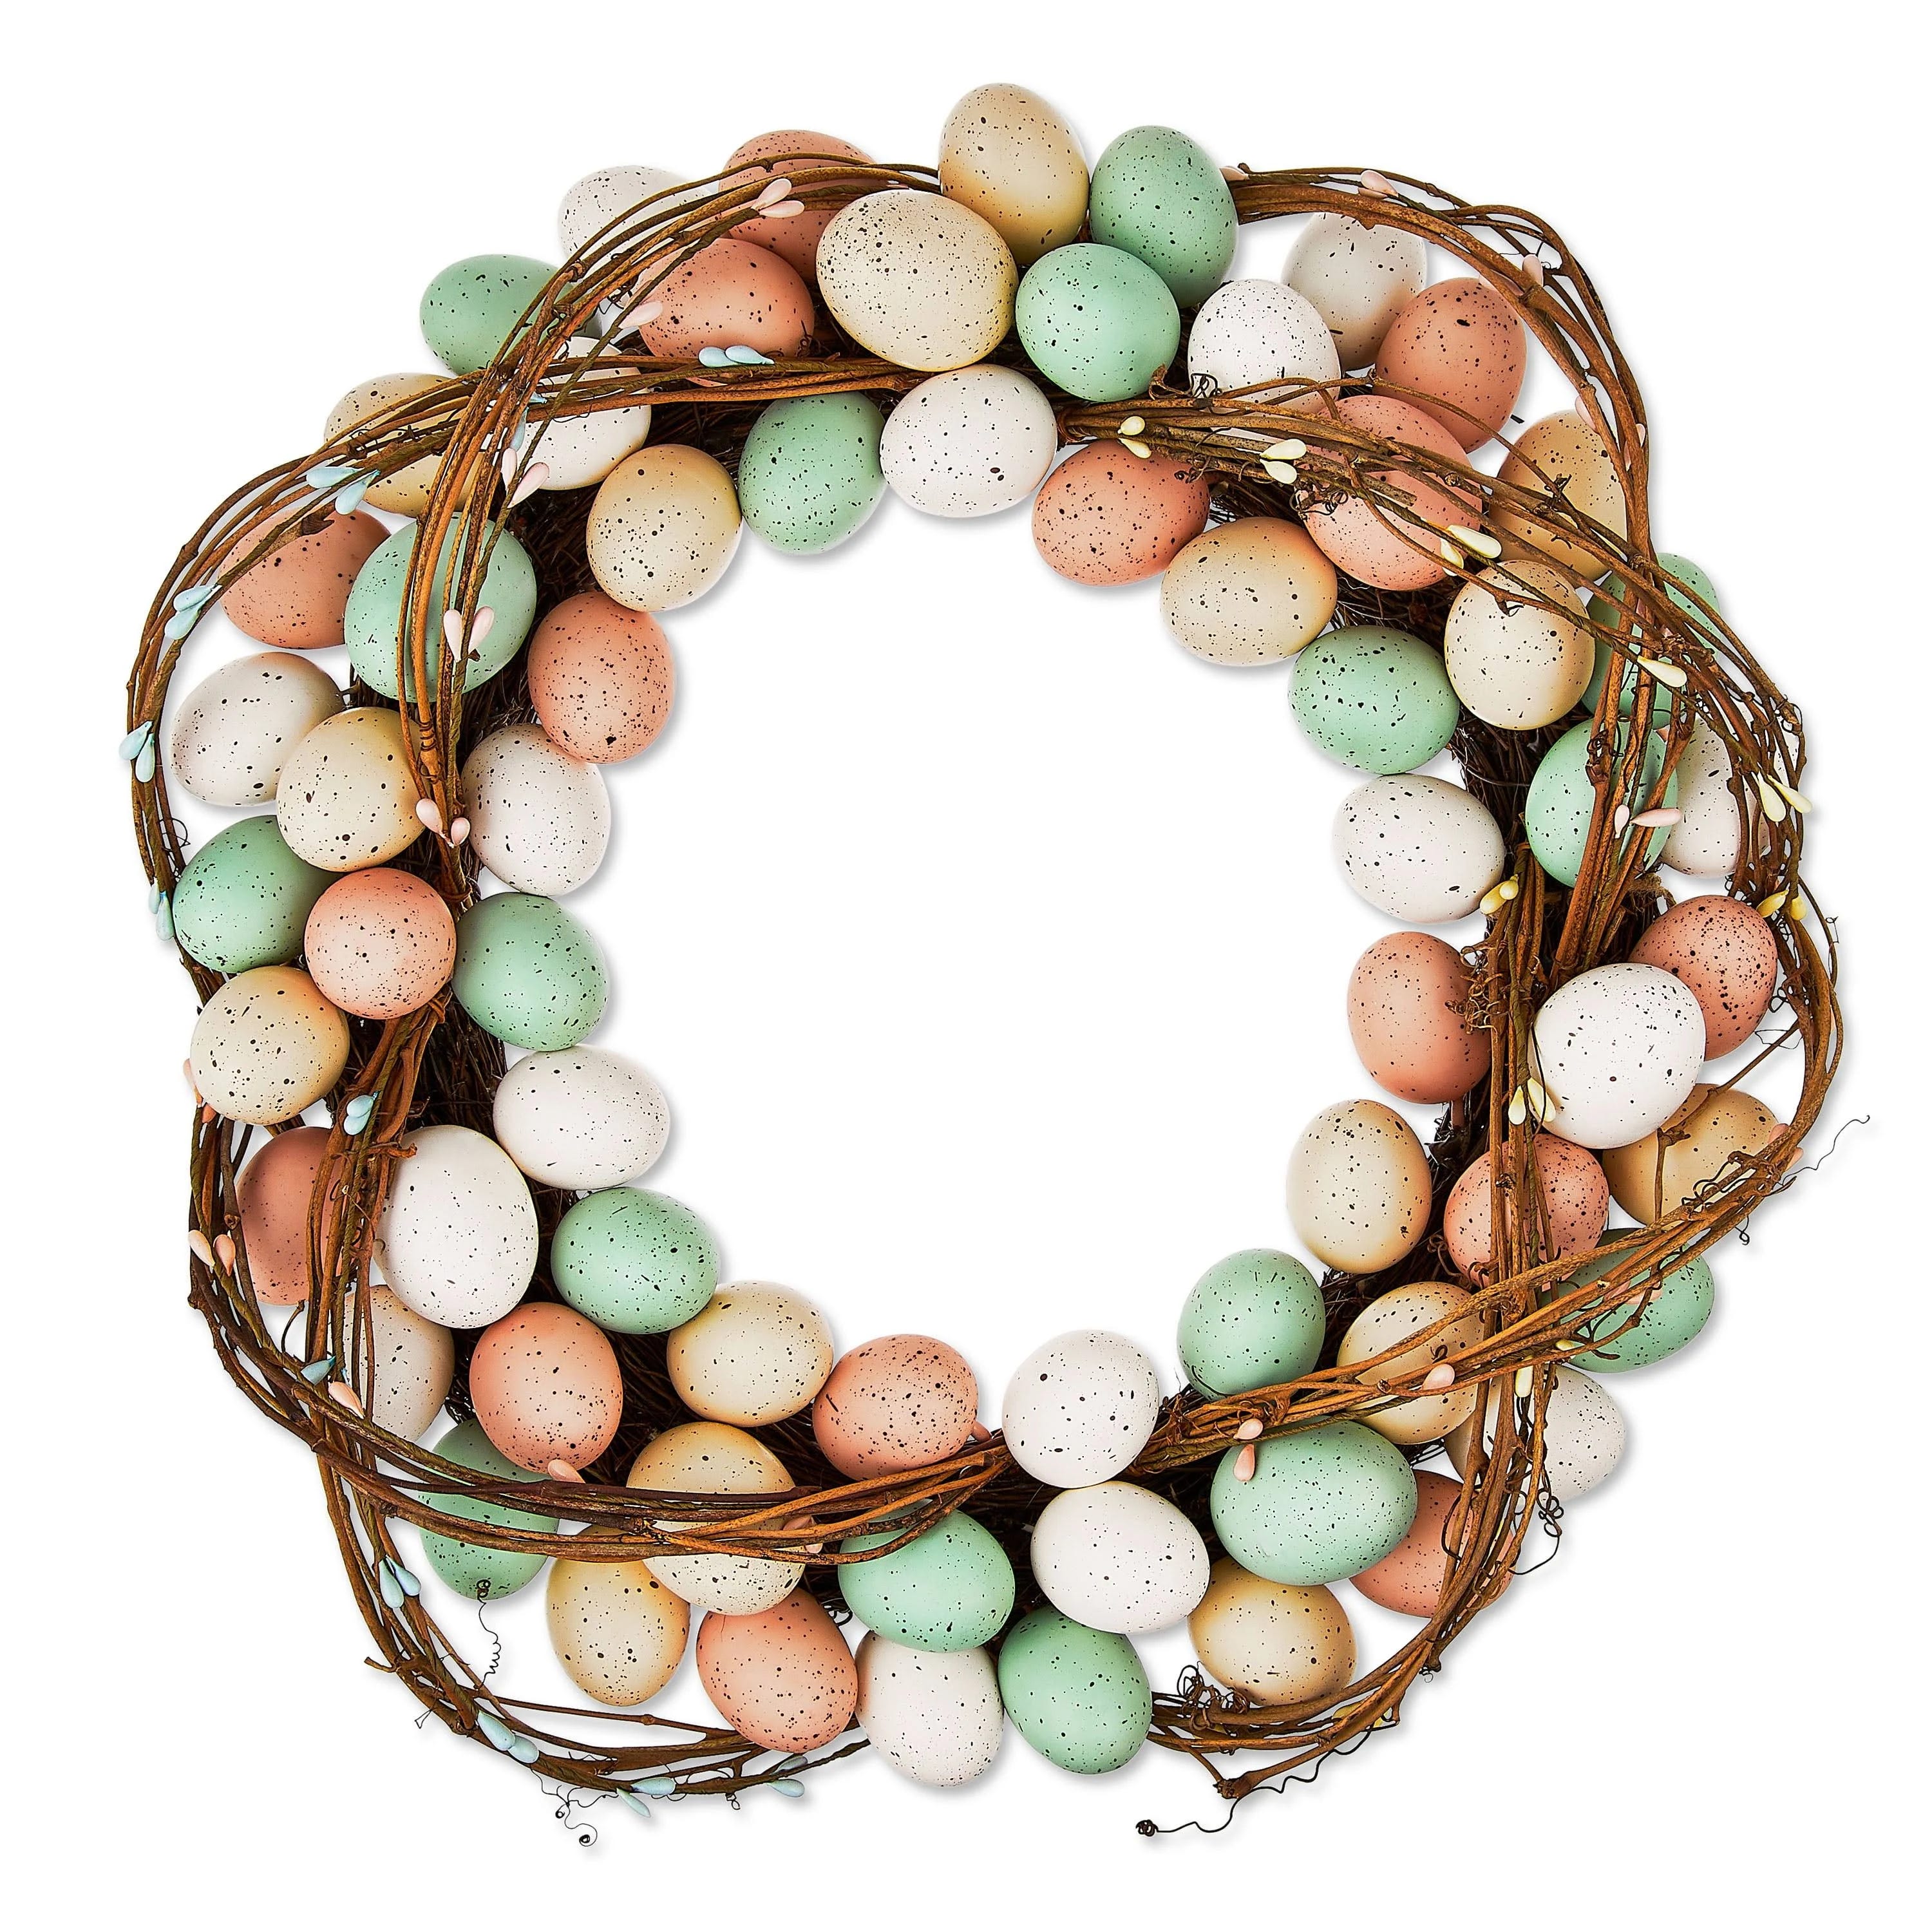 Vibrant Easter Egg Wreath by Way to Celebrate | Image